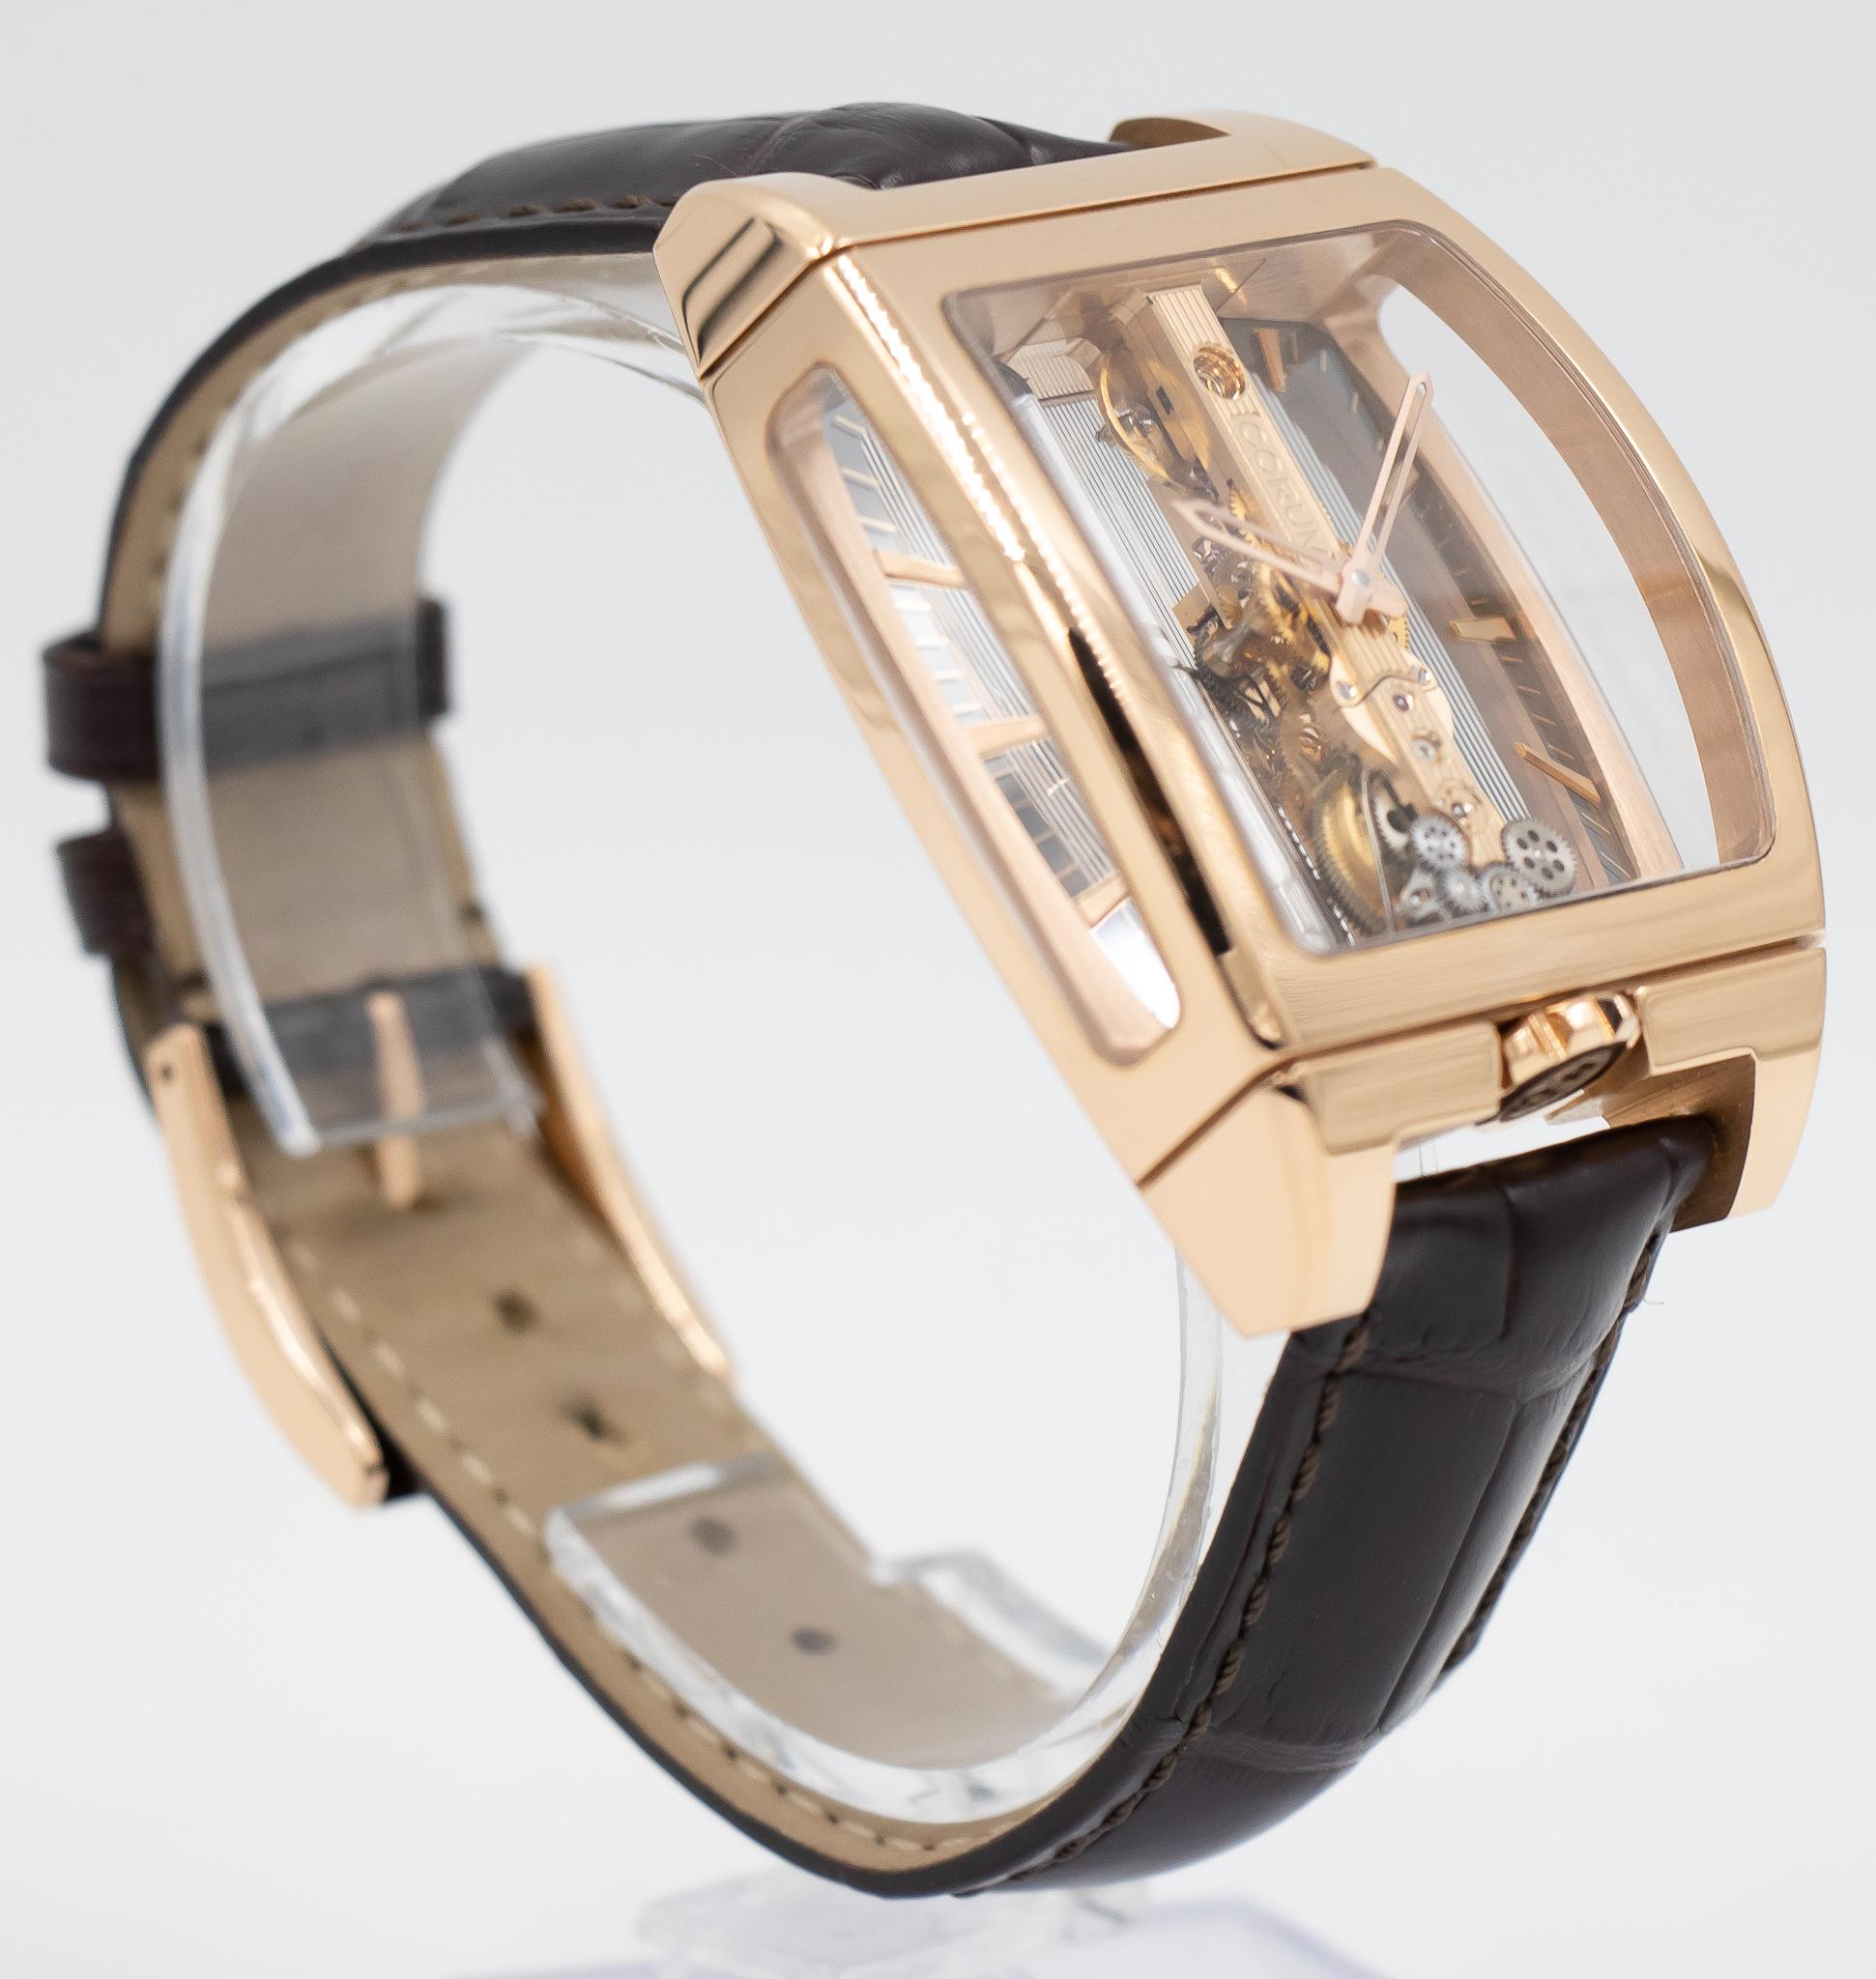 The beautiful Corum watch came to our store as a trade from a collector and is in amazing condition. This wristwatch features a 18k rose gold case, a transparent dial, sides & case-back. The power behind this unique wrist watch is CO313 automatic